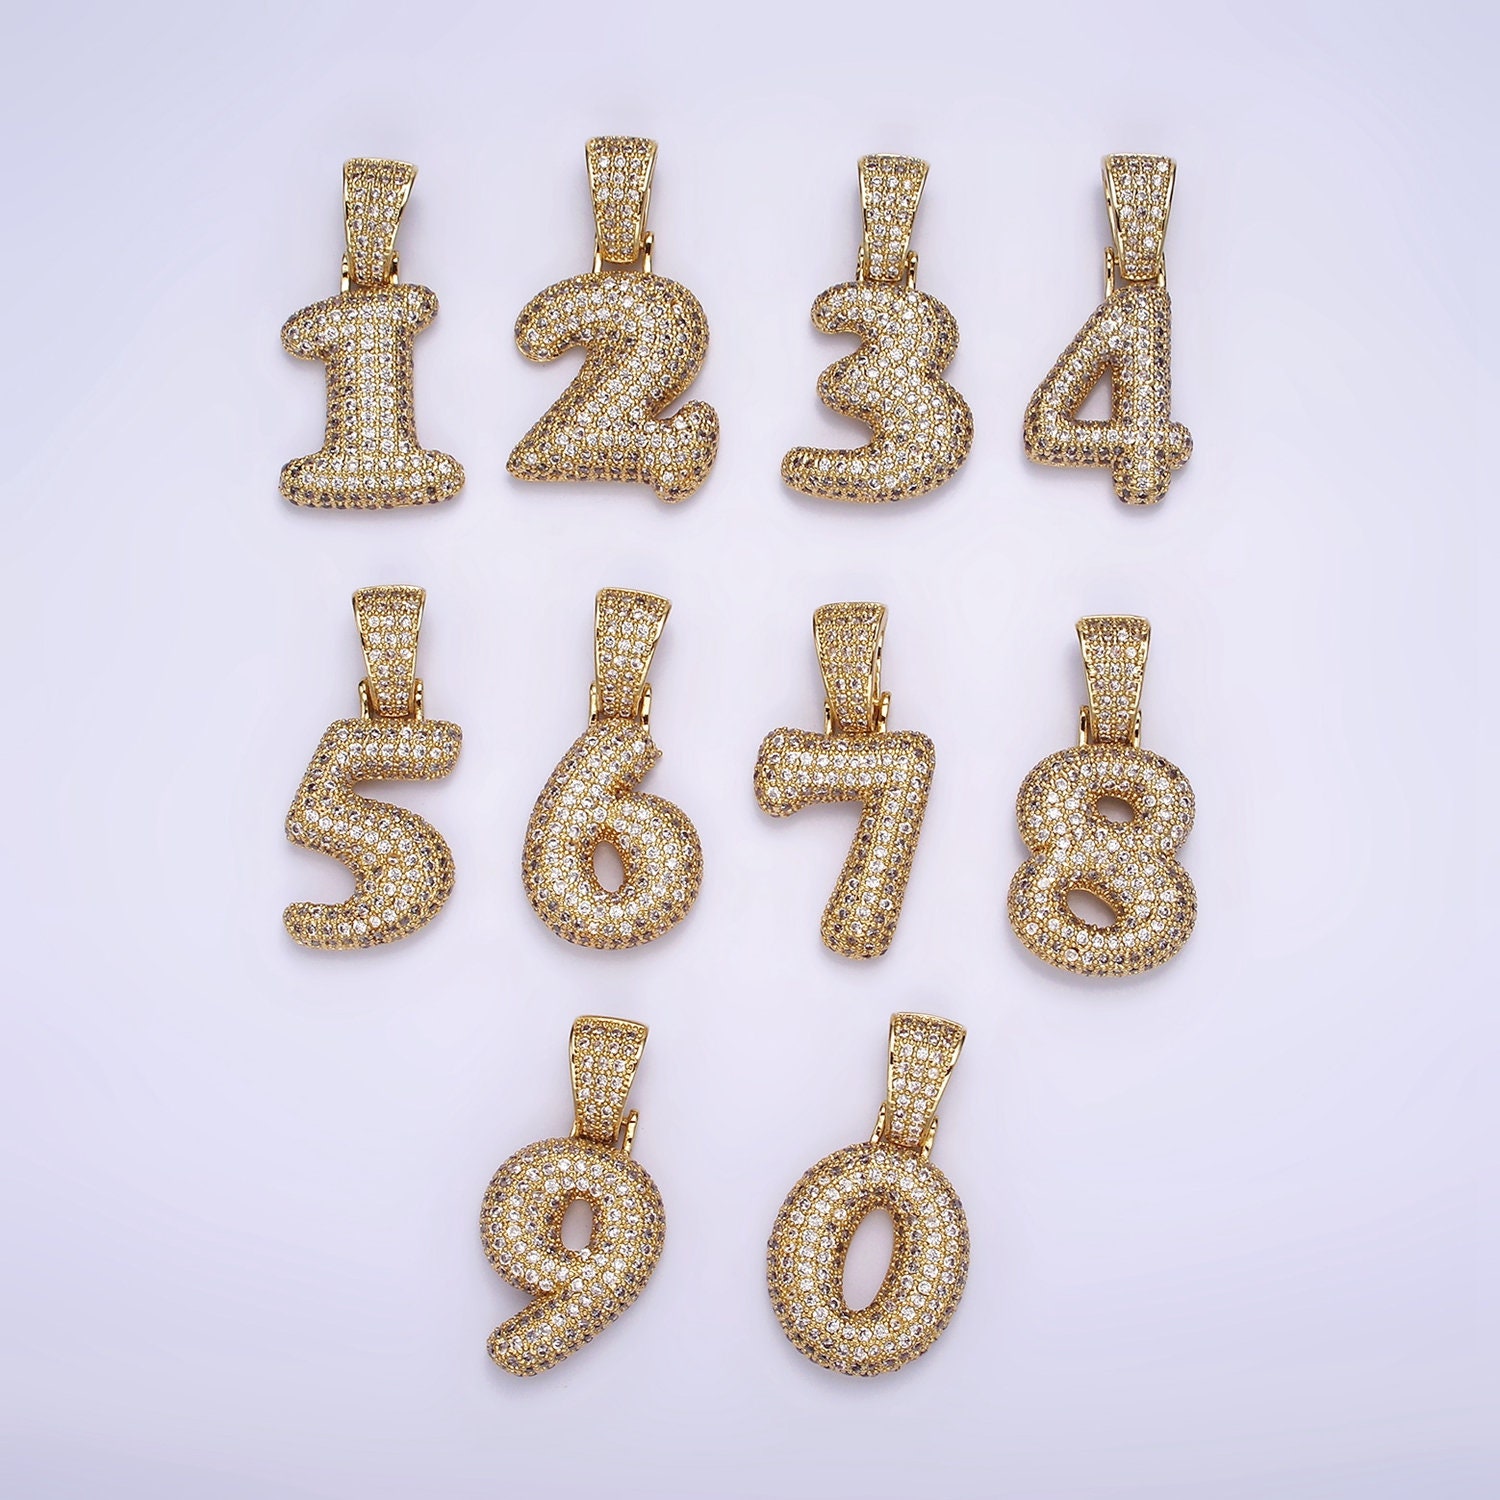 6x7mm 24k Shiny Gold Numbers, Number Charms, Number Beads, Birthday Charms,  Initial Charms, Gold Plated Beads, Gold Plated Charms, MBGHRF17